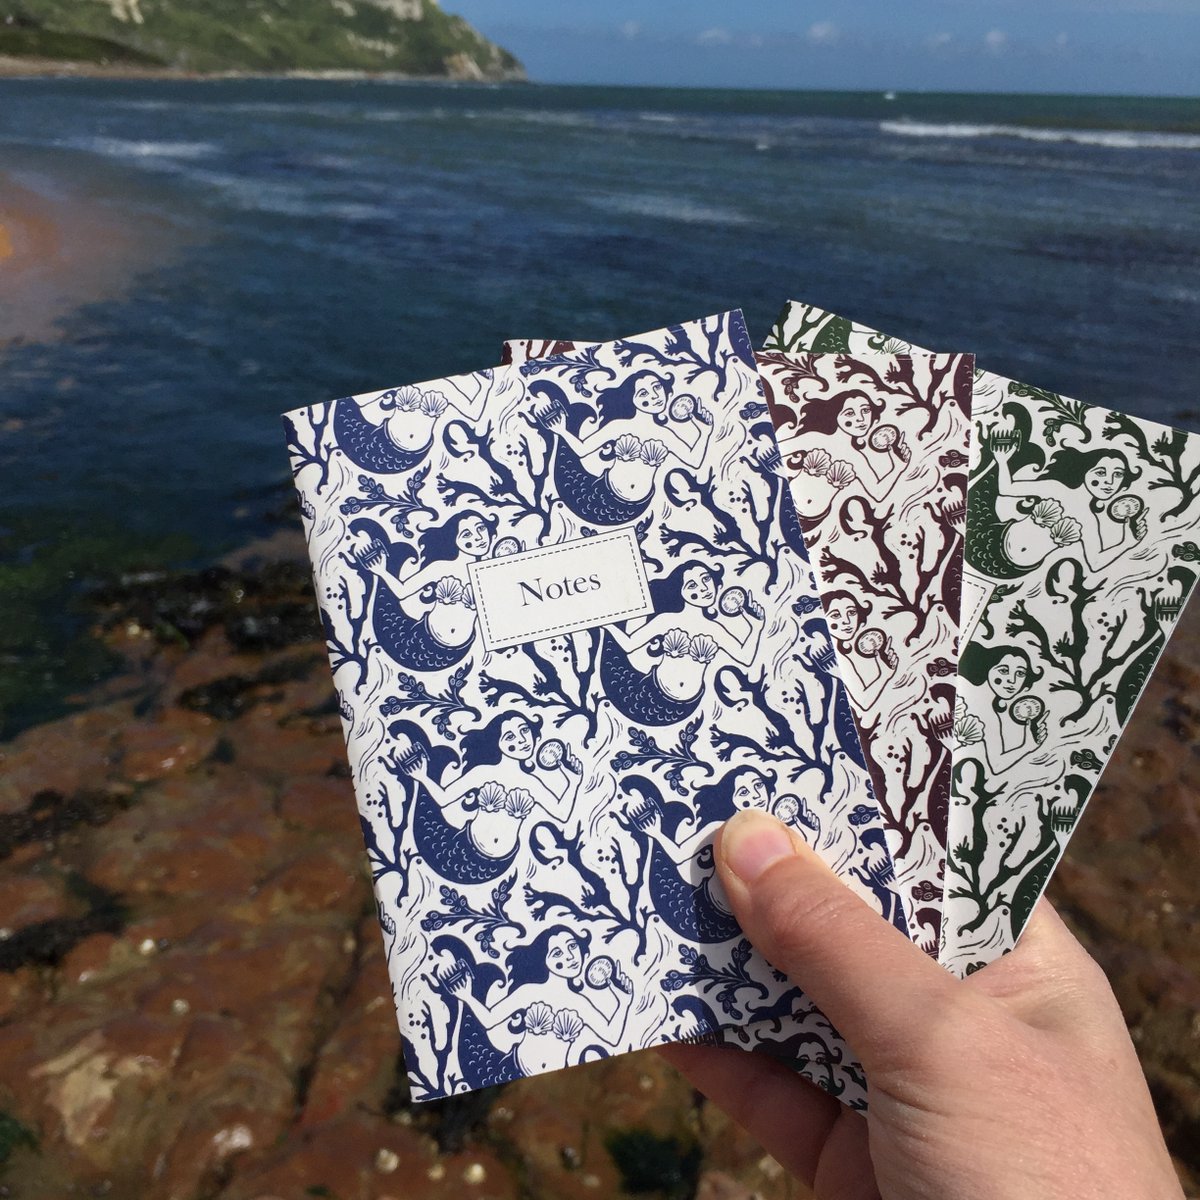 We had a gorgeous trip to the beach last weekend and I thought my Mermaid Notebooks might like a visit too! #UKGiftHour #UKGiftAM #shopindie #giftideas #mermaids #notebooks sarahrobinsondesigns.etsy.com/listing/172862…